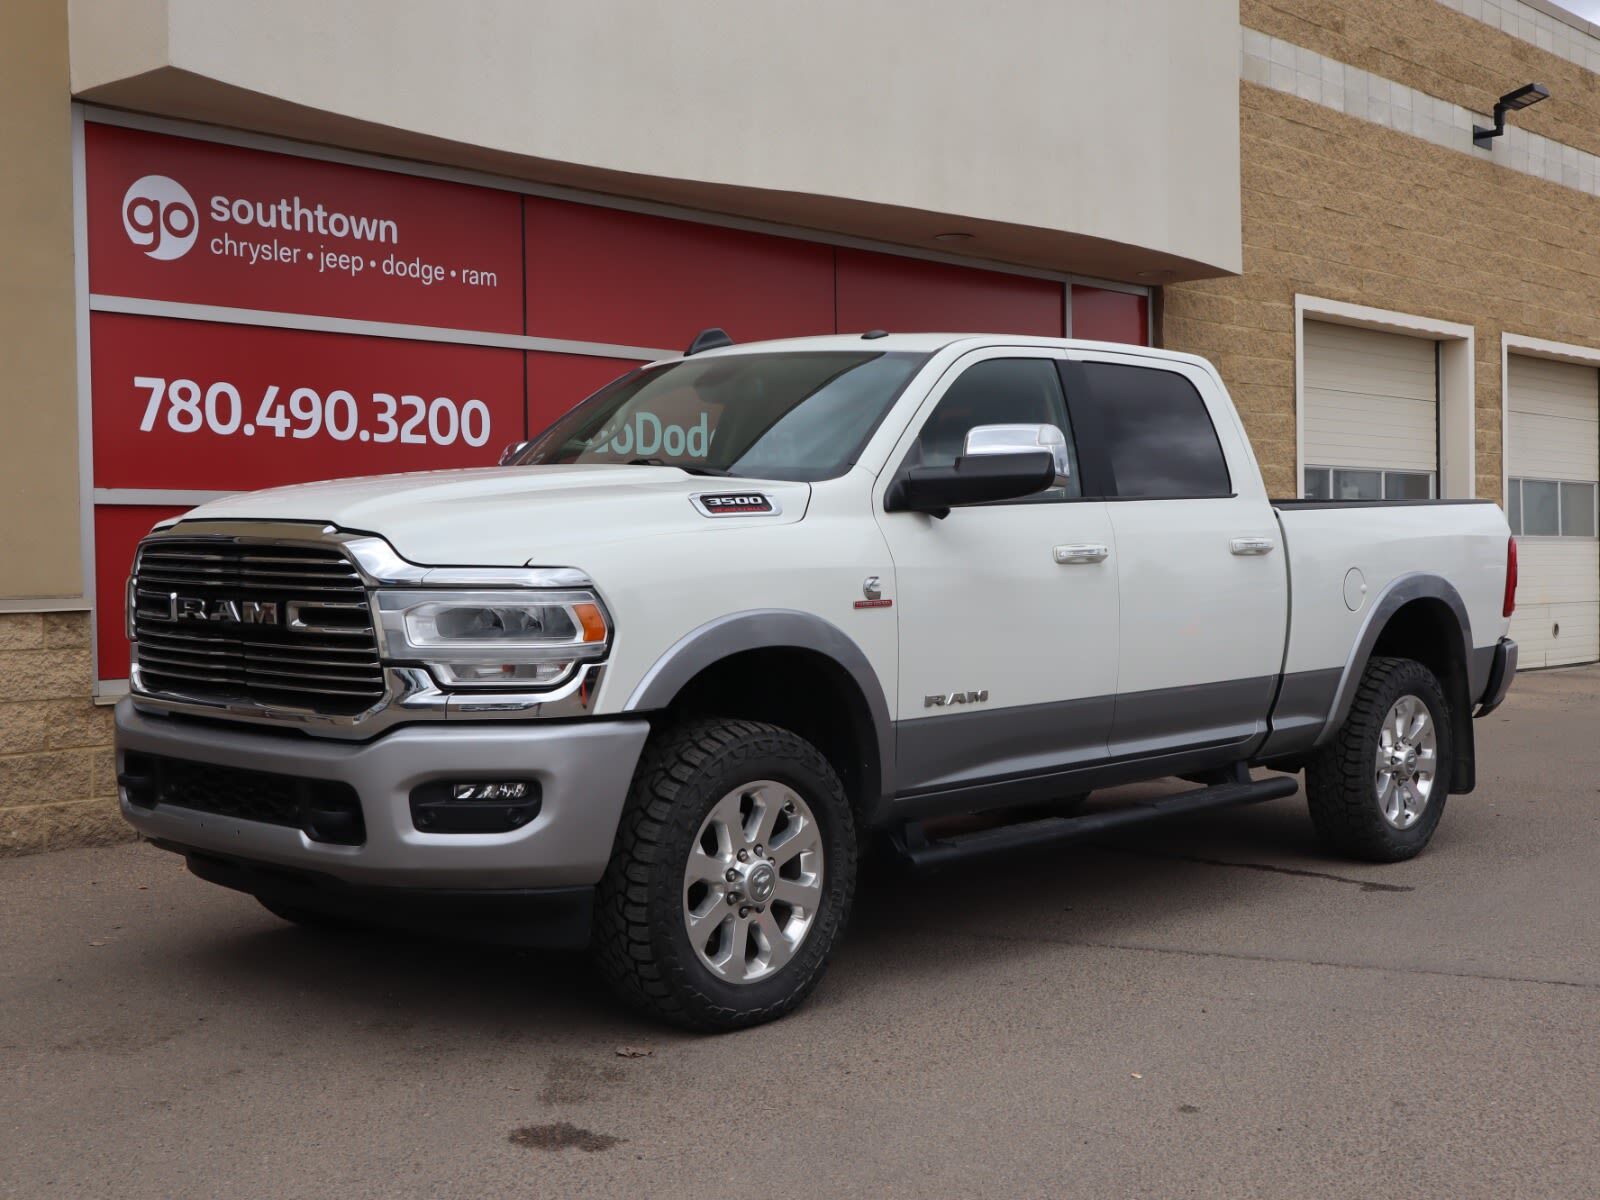 2020 Ram 3500 LARAMIE IN PEARL WHITE EQUIPPED WITH A 6.7L CUMMIN